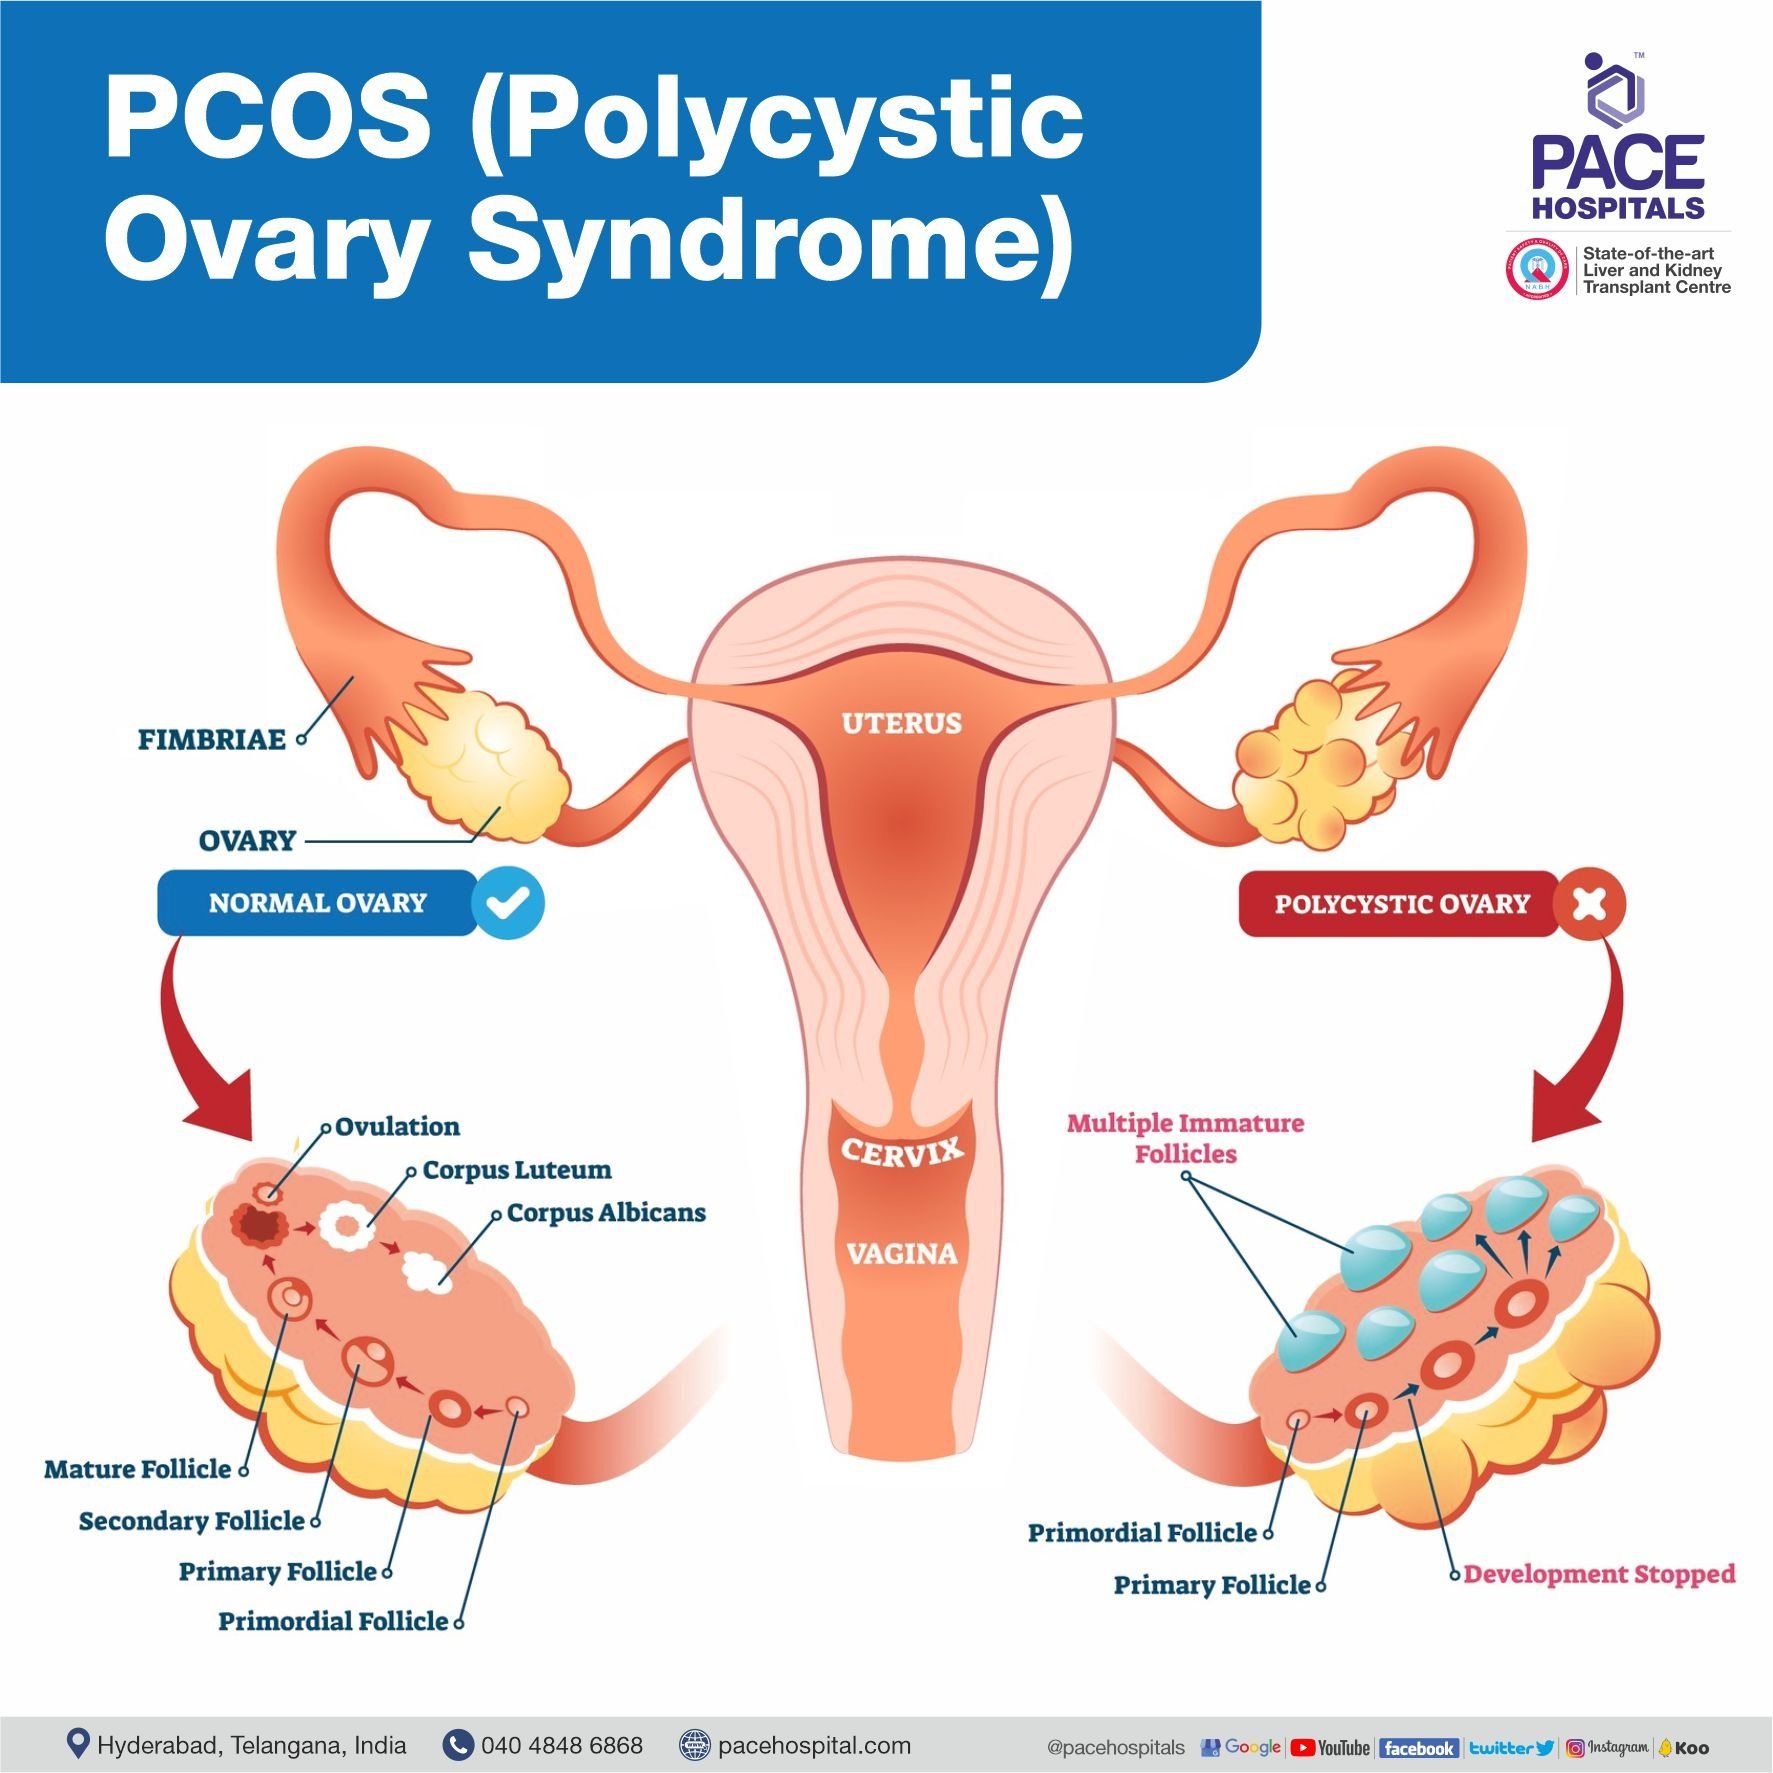 What is PCOS (Polycystic Ovary Syndrome), PCOD (Polycytic ovarian disease)